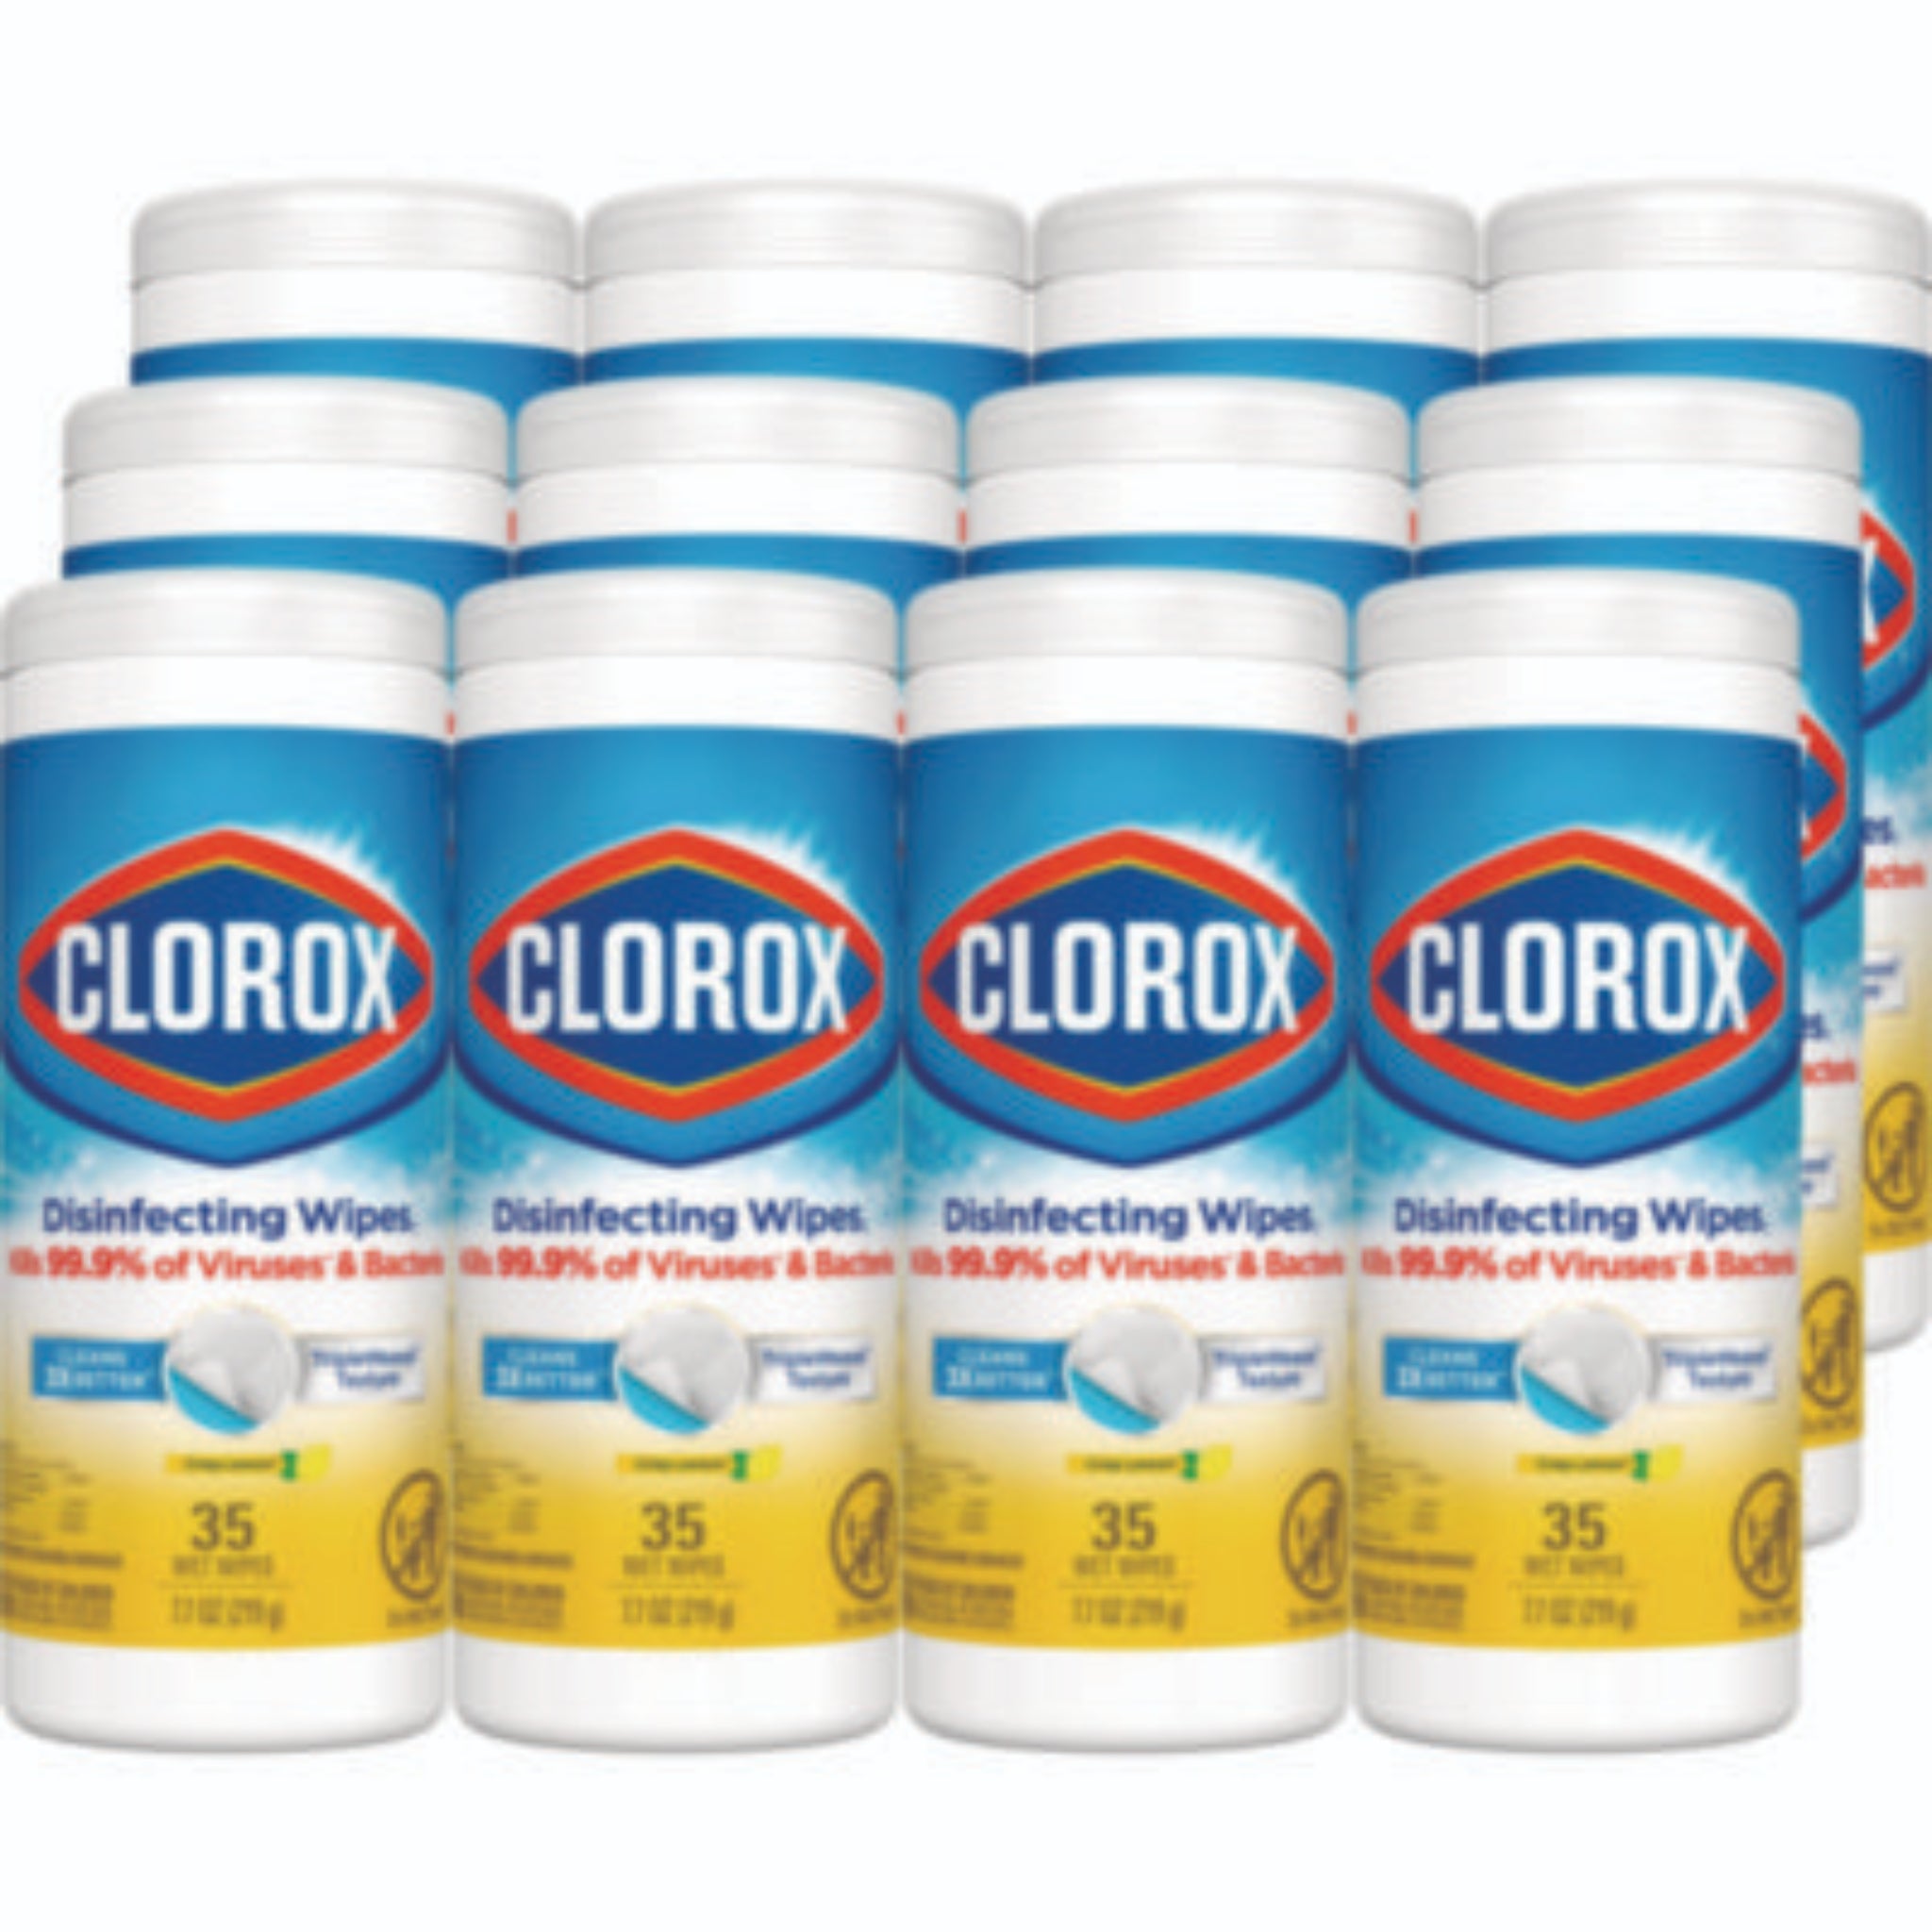 CLOROX SALES CO. CLO01594CT Disinfecting Wipes, 1-Ply, 7 x 8, Crisp Lemon, White, Carton of 12 Canister